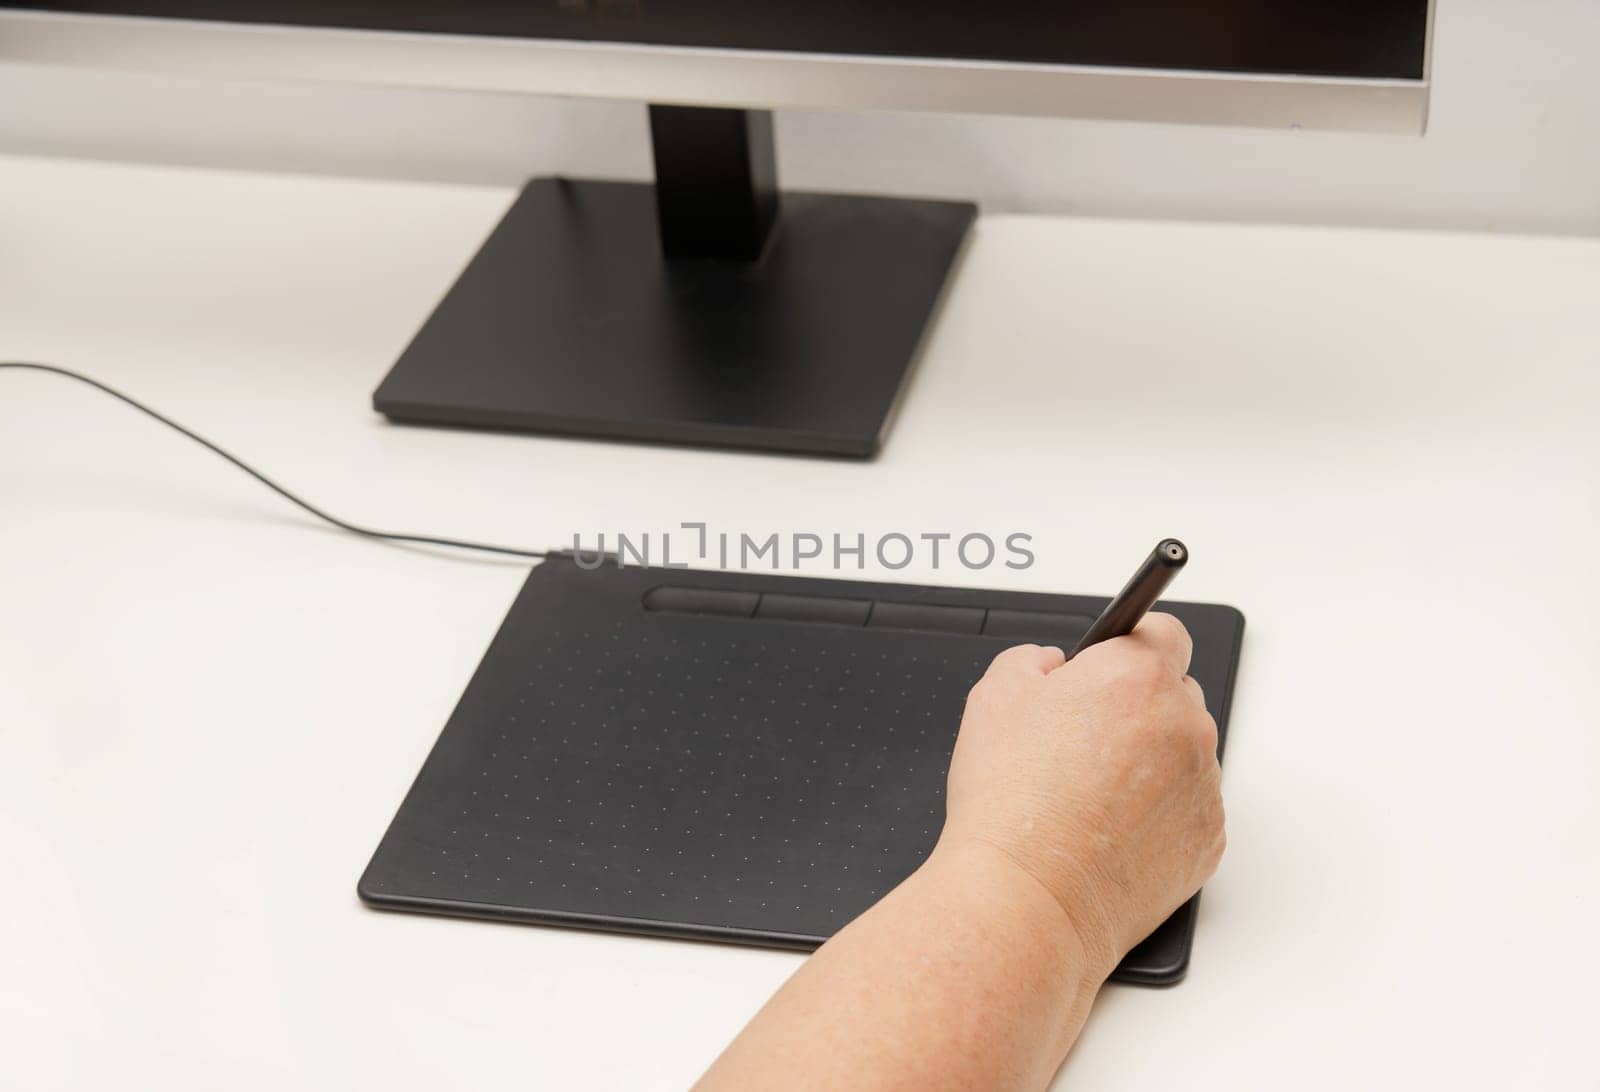 Woman hand working on her computer with a digital graphic tablet, in the background a monitor with an image